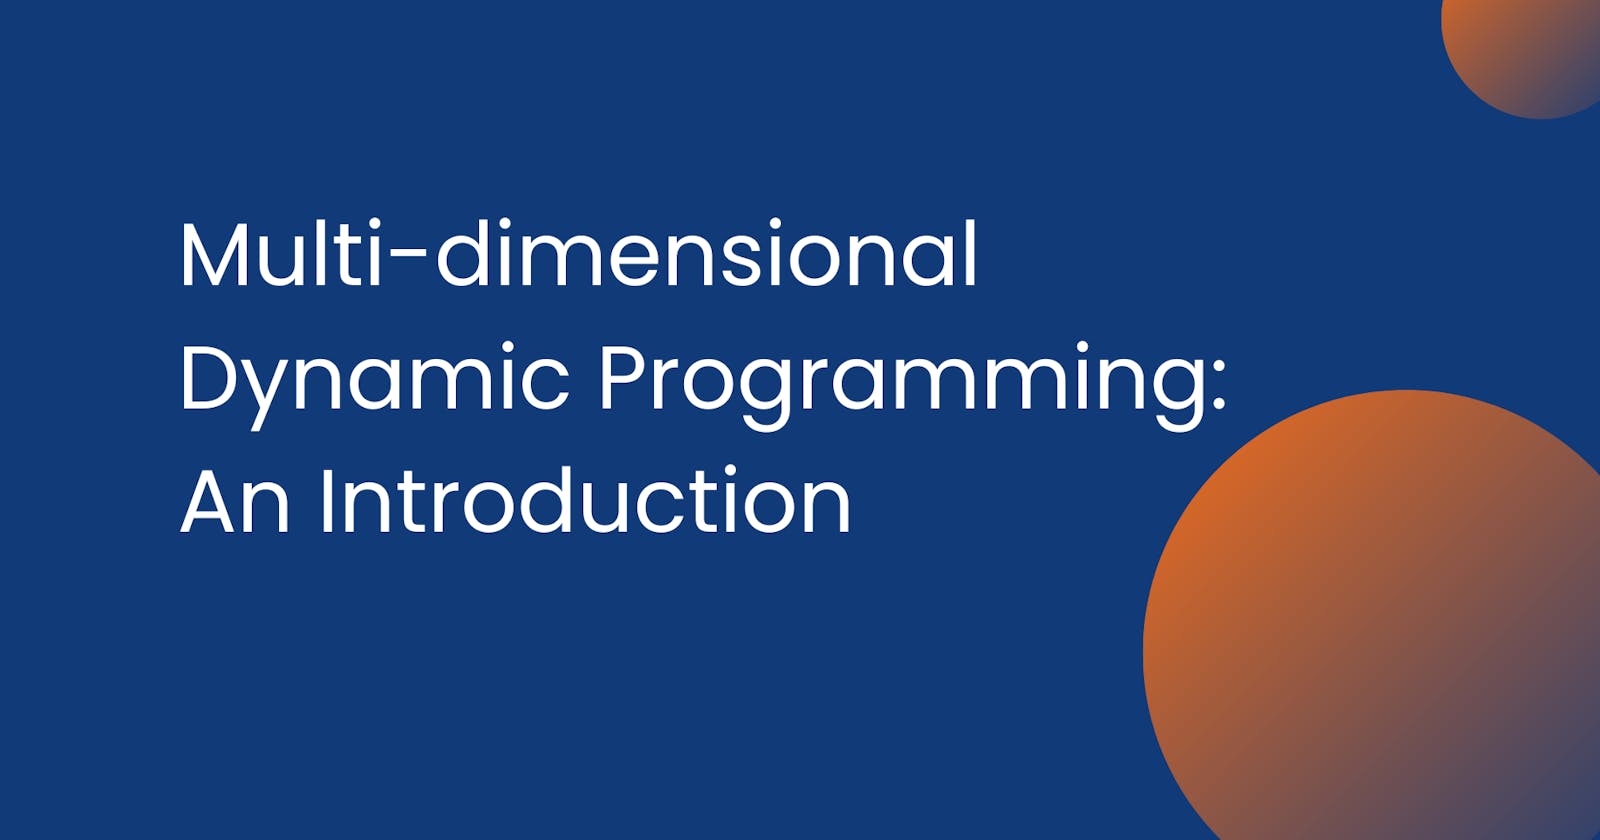 Multi-dimensional Dynamic Programming: An Introduction